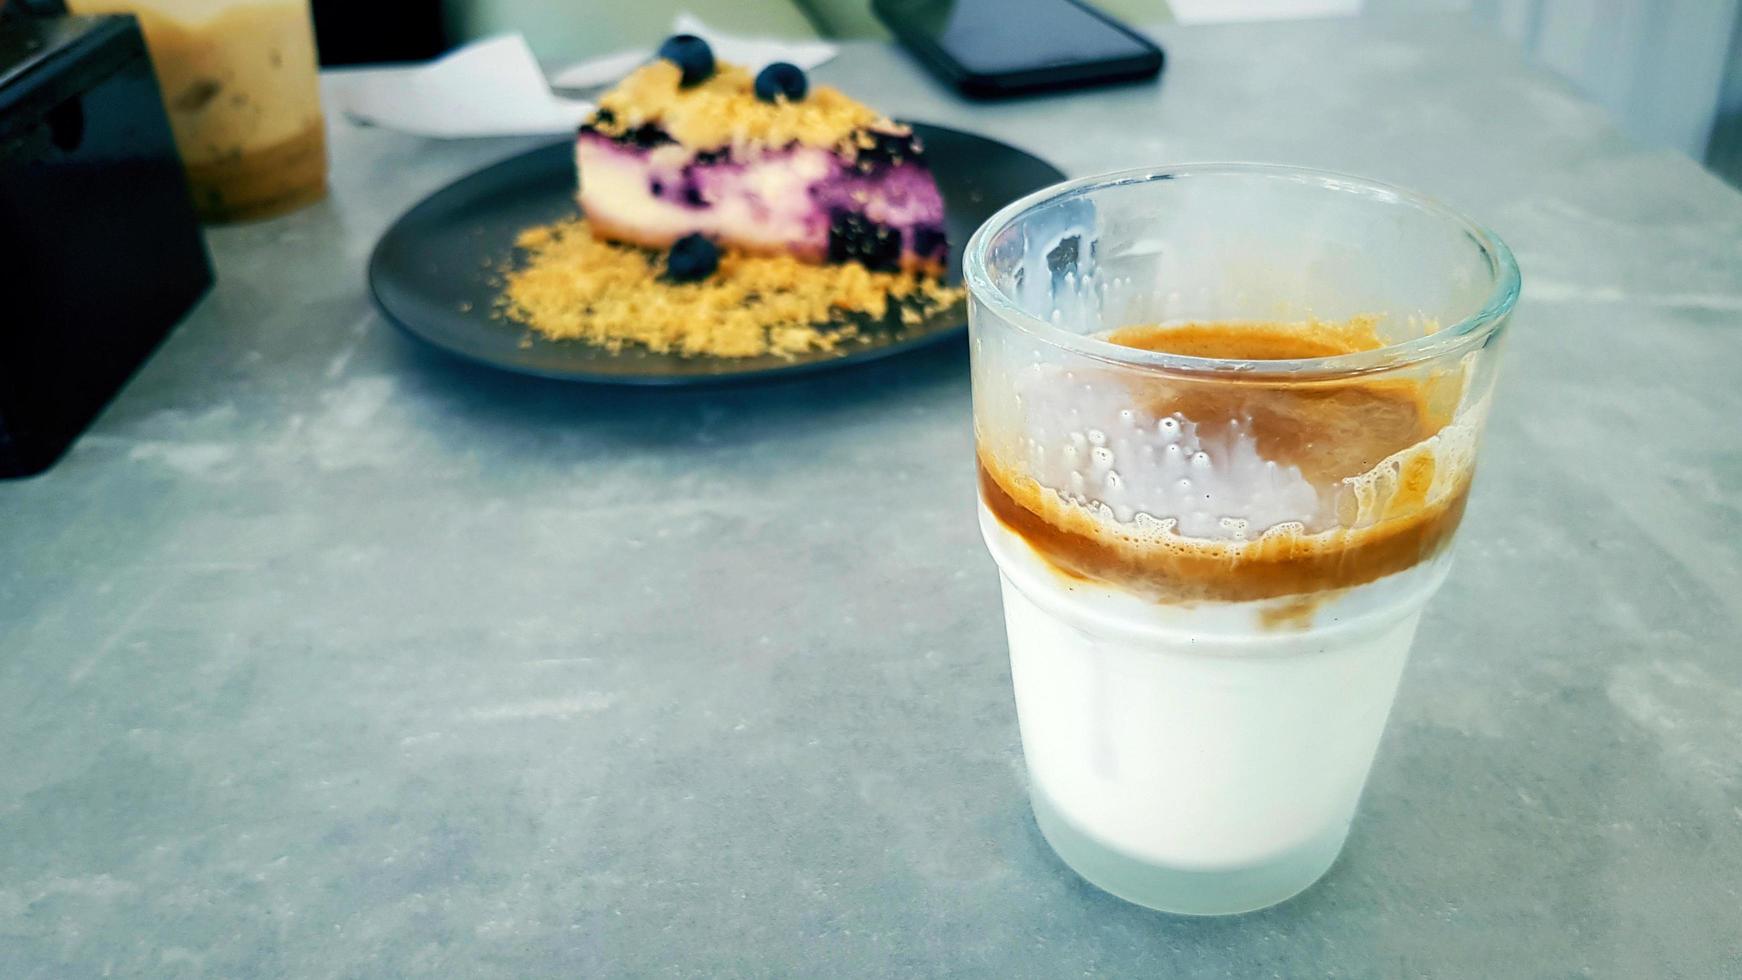 Glass of Dirty coffee with blurred blueberry crumble on black dish or plate and smartphone, phone background on gray or gray concrete table at cafe shop. Food and object with copy space on left. photo